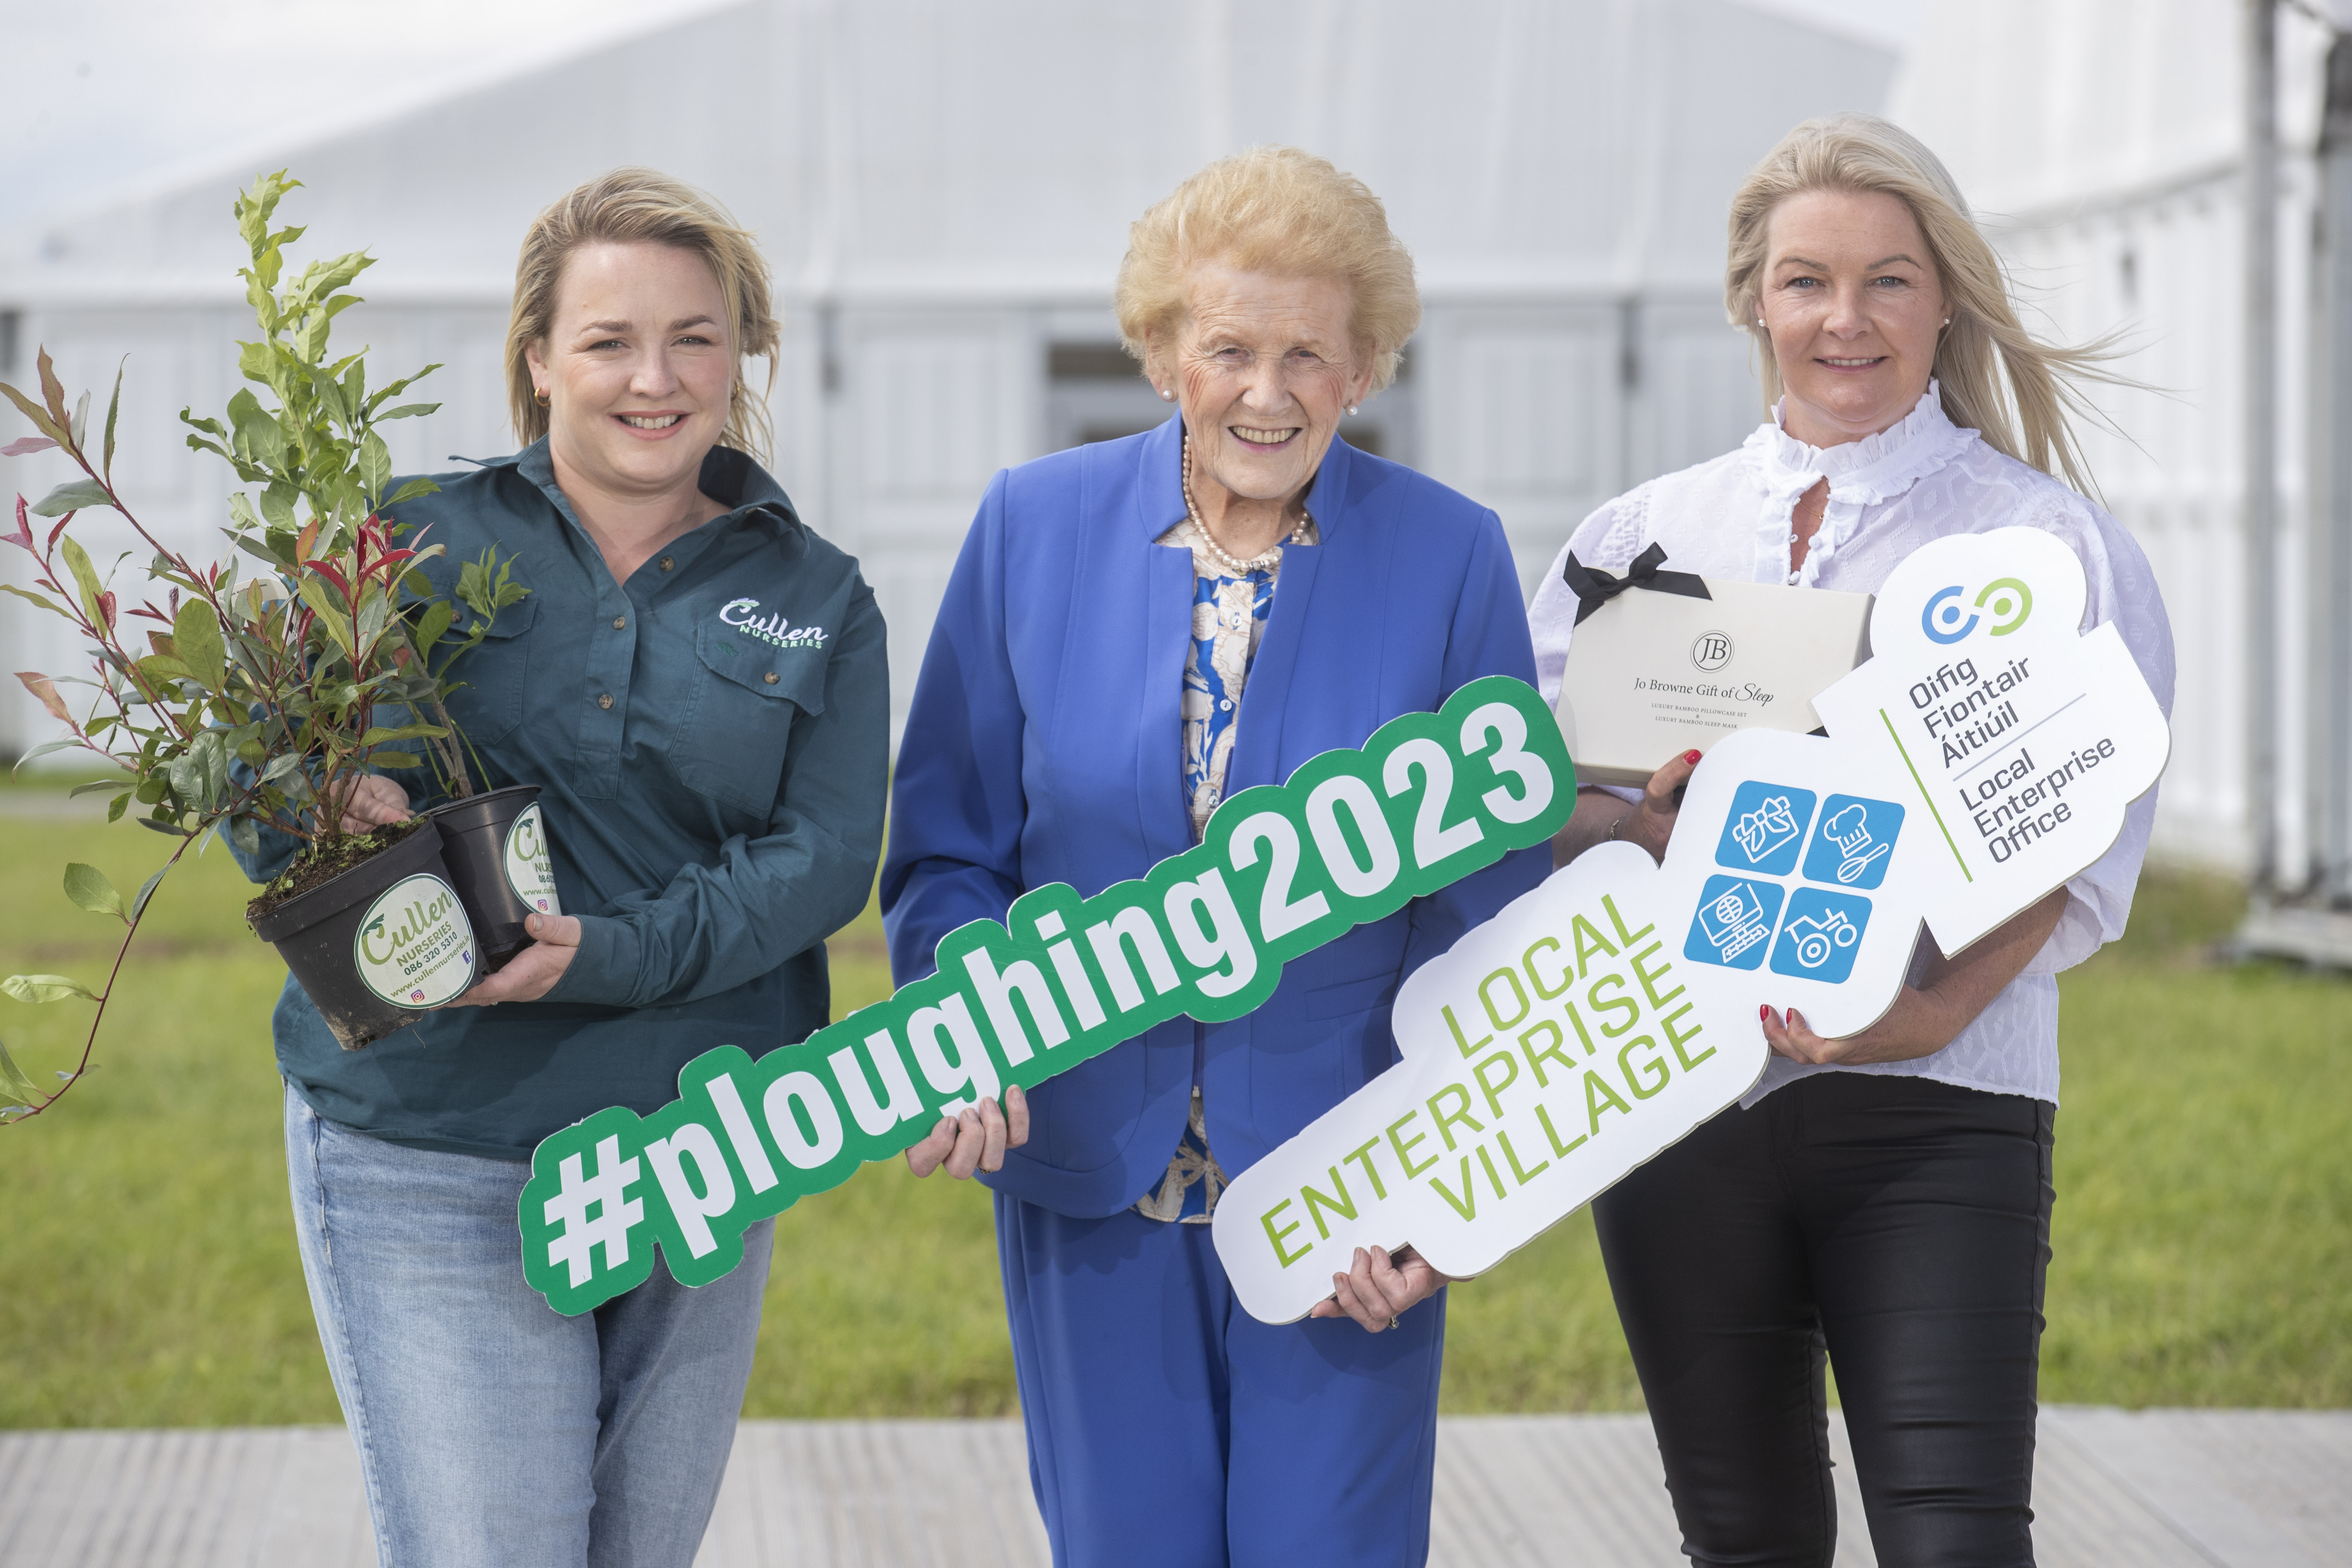 CARLOW ENTERPRISES GETS CHANCE AT PLOUGHING 2023